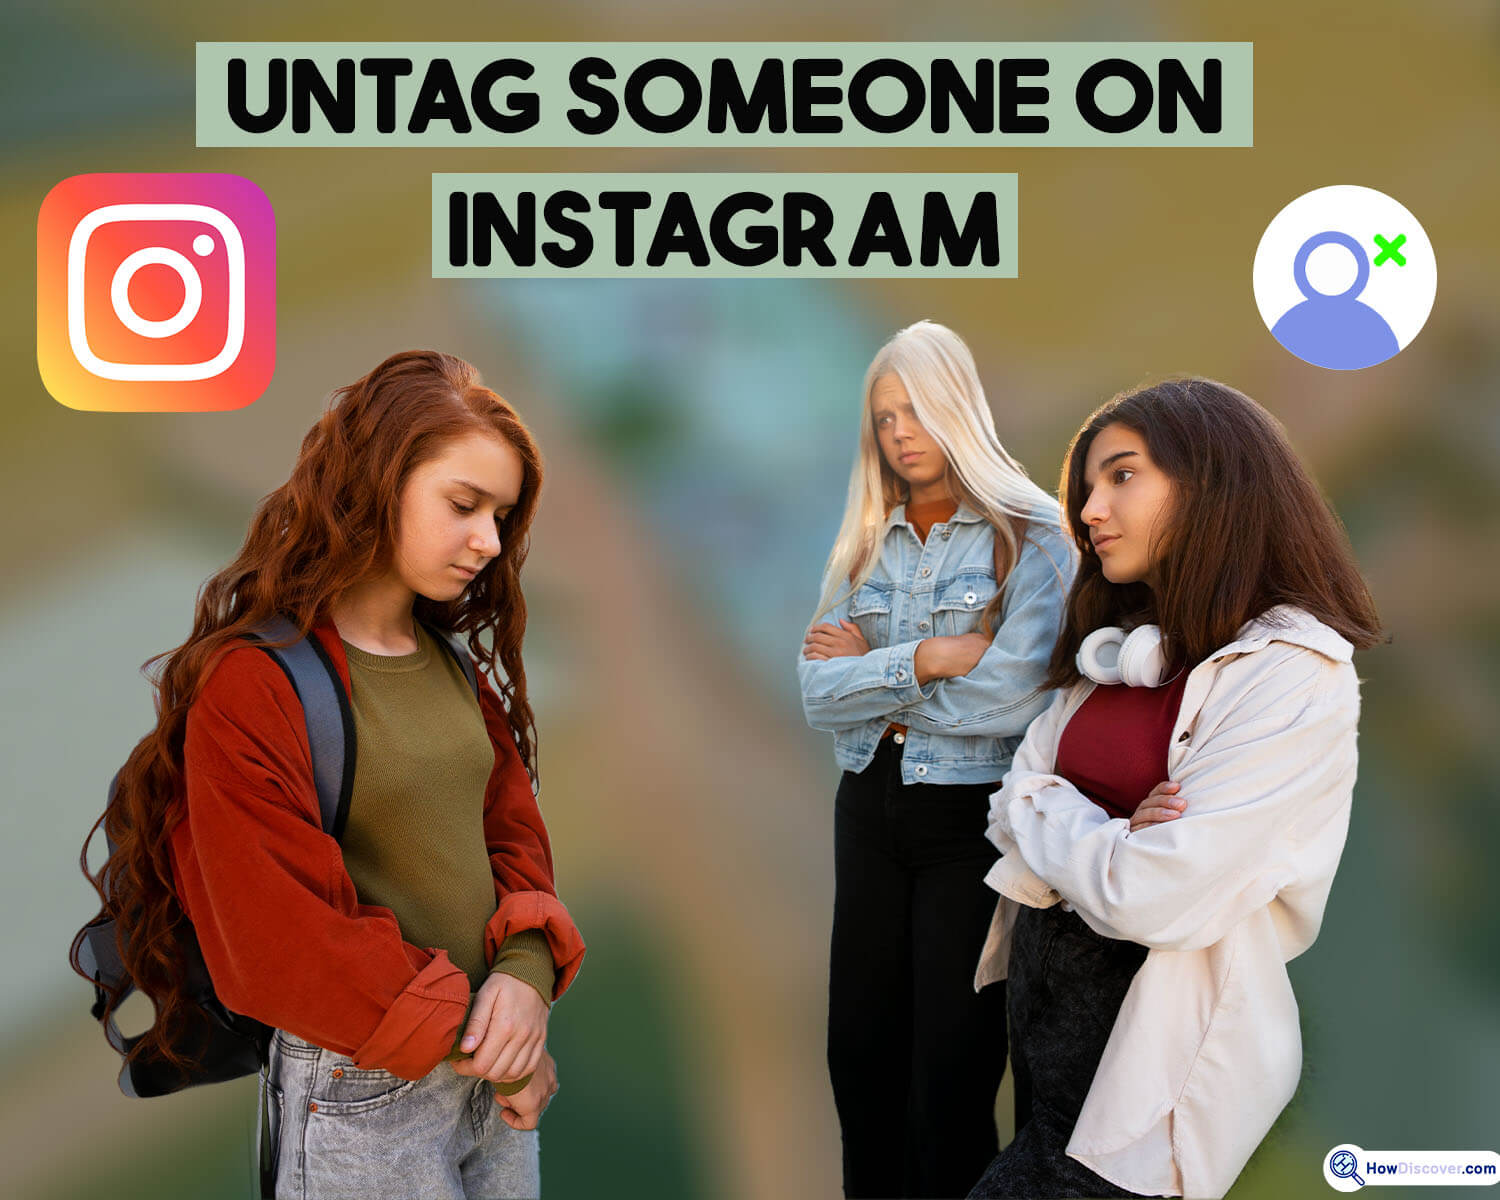 How To Untag Someone on Instagram